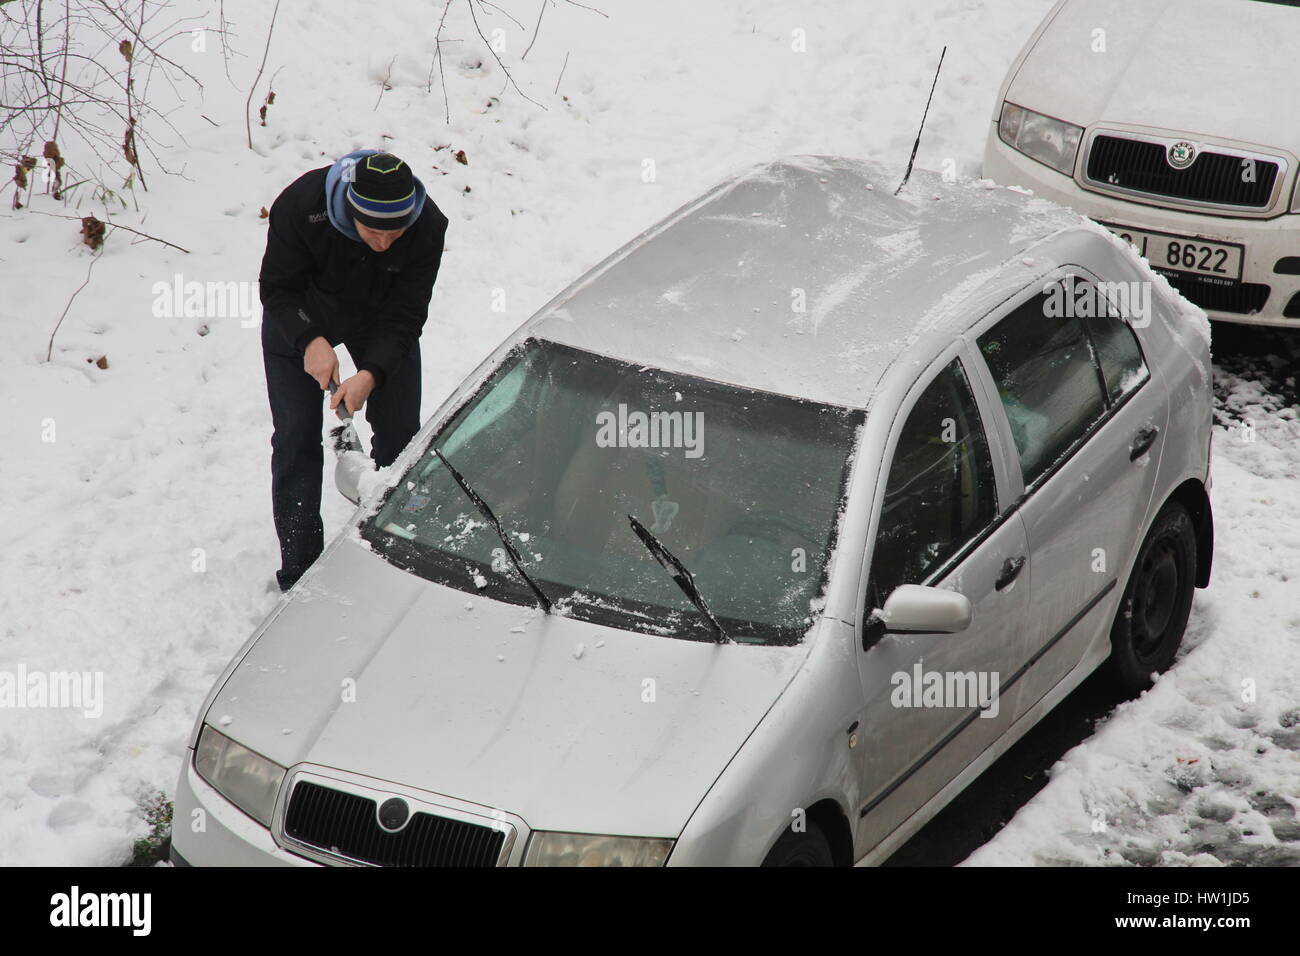 A car owner in Prague's Libeň area scrapes off snow and frost on his vehicle in order to be able to drive off his parked car. Stock Photo